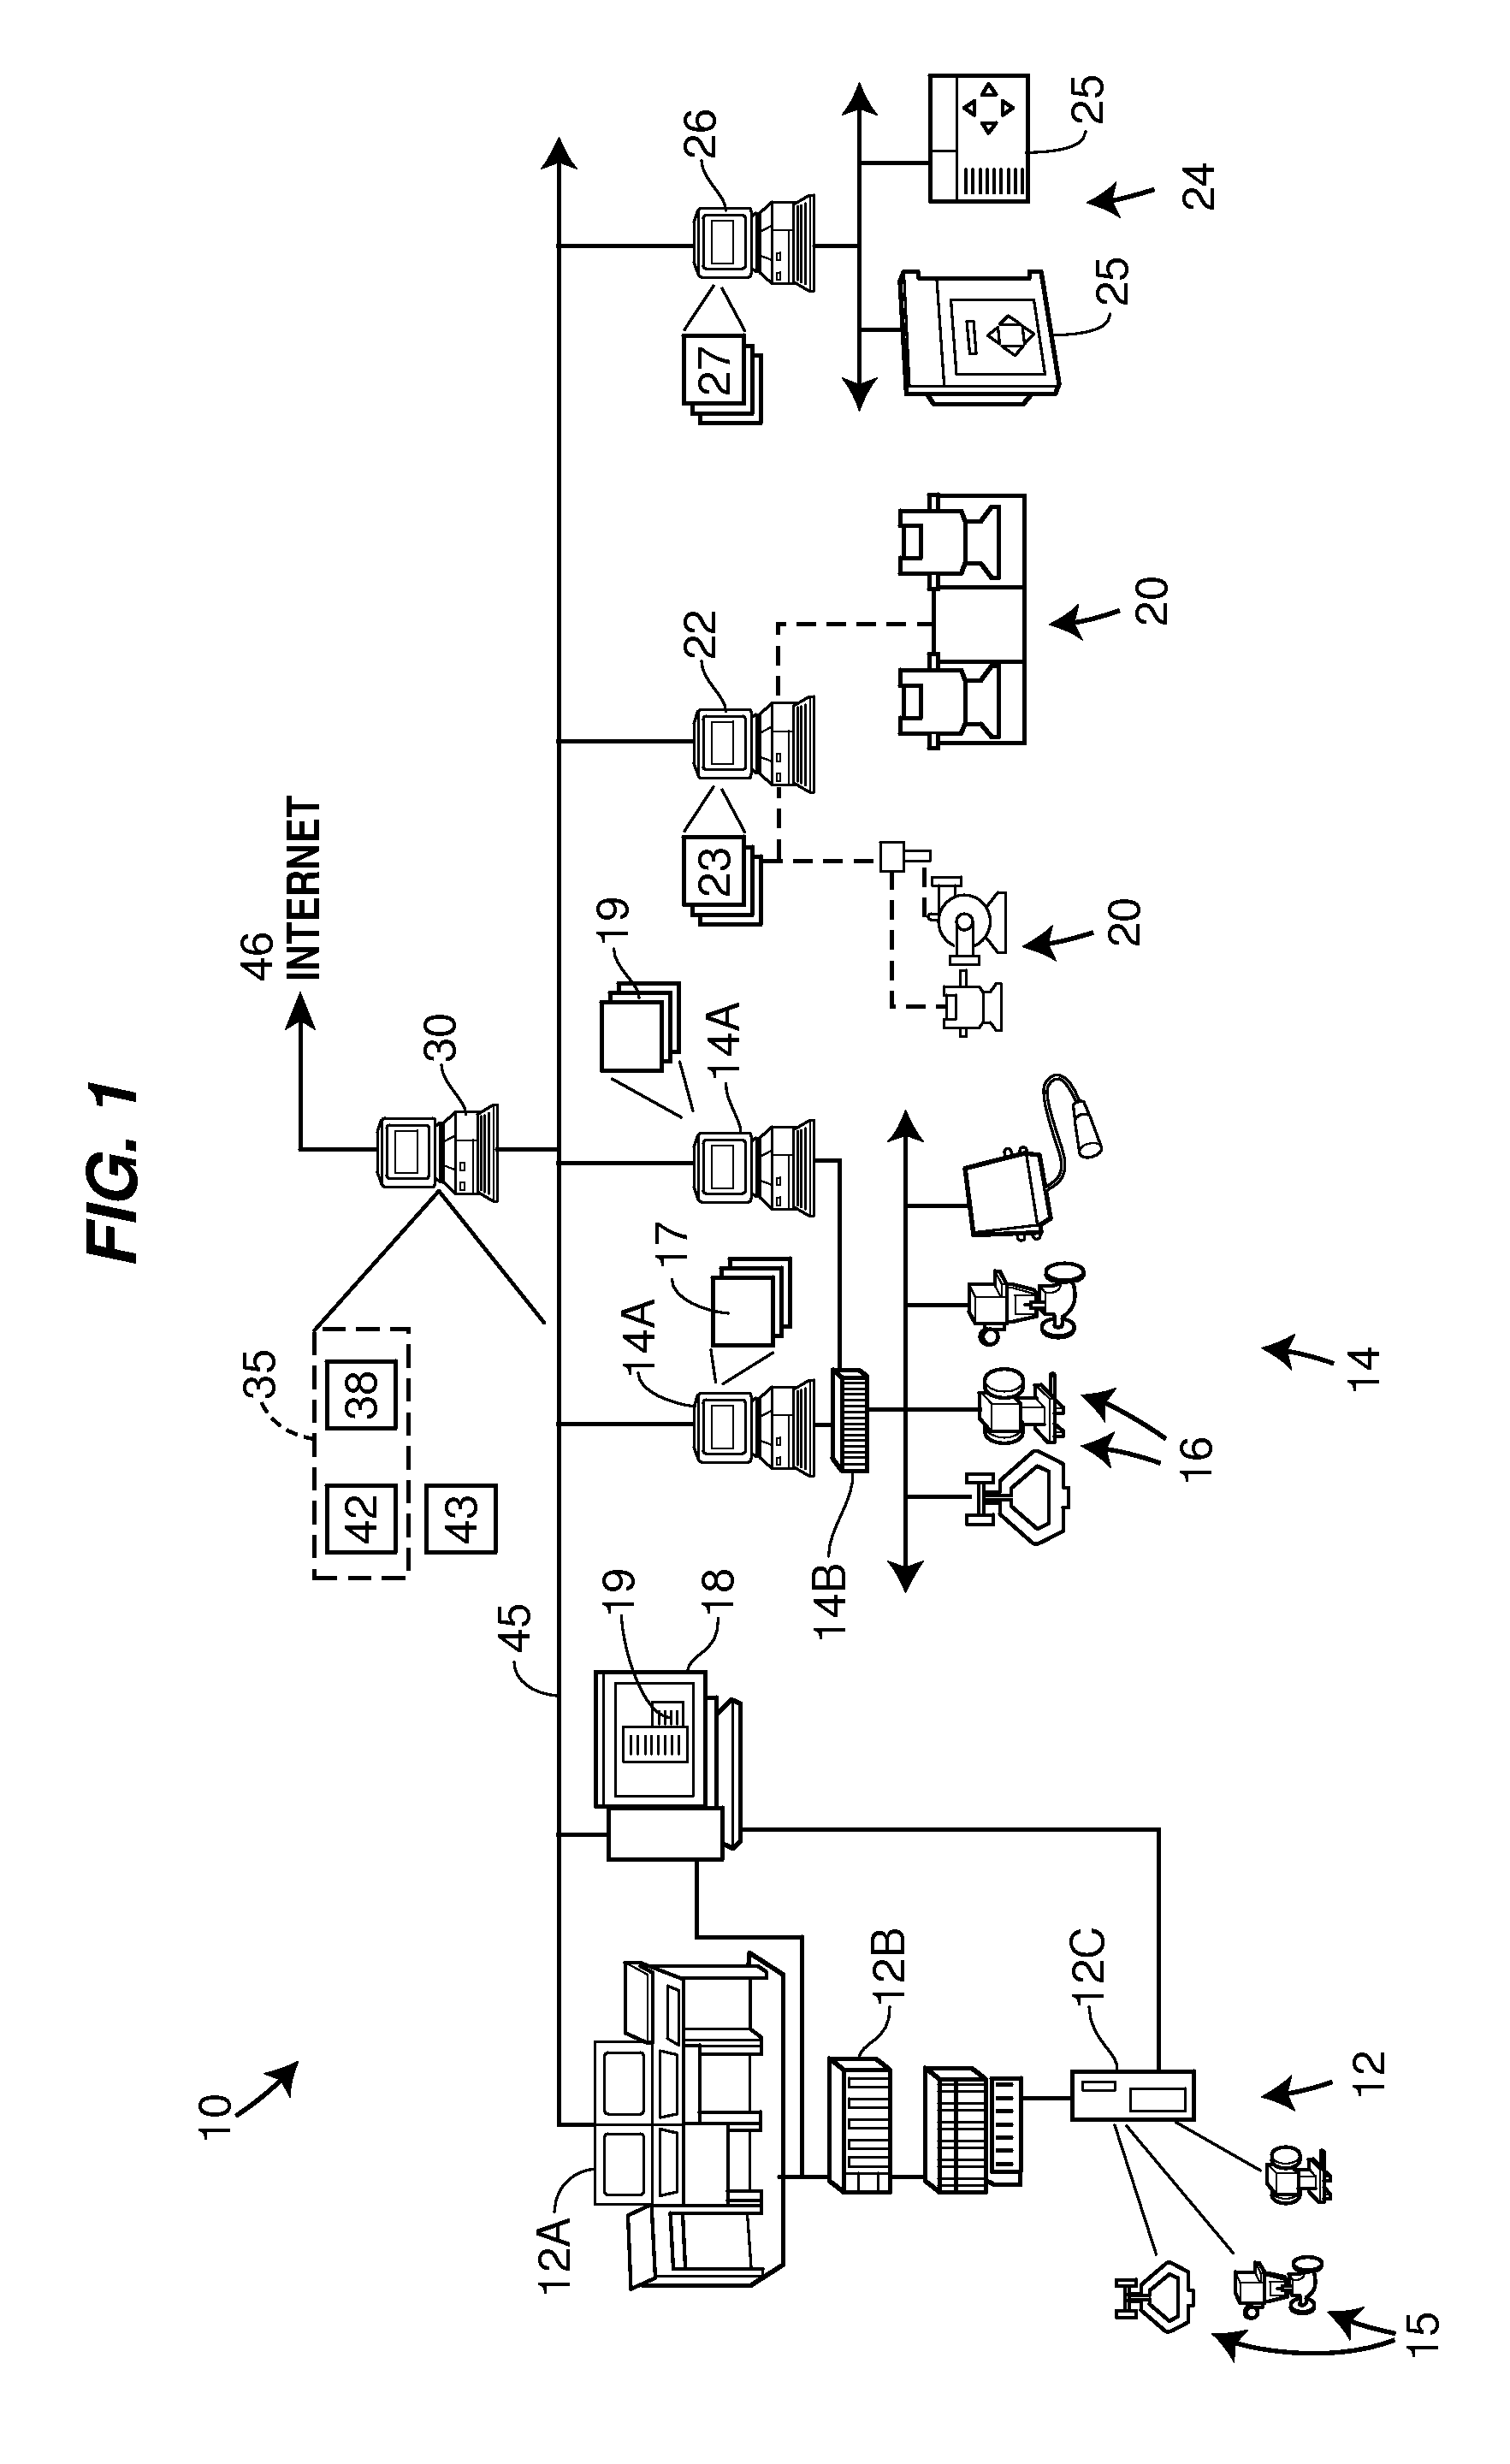 Method and system for detecting abnormal operation of a level regulatory control loop